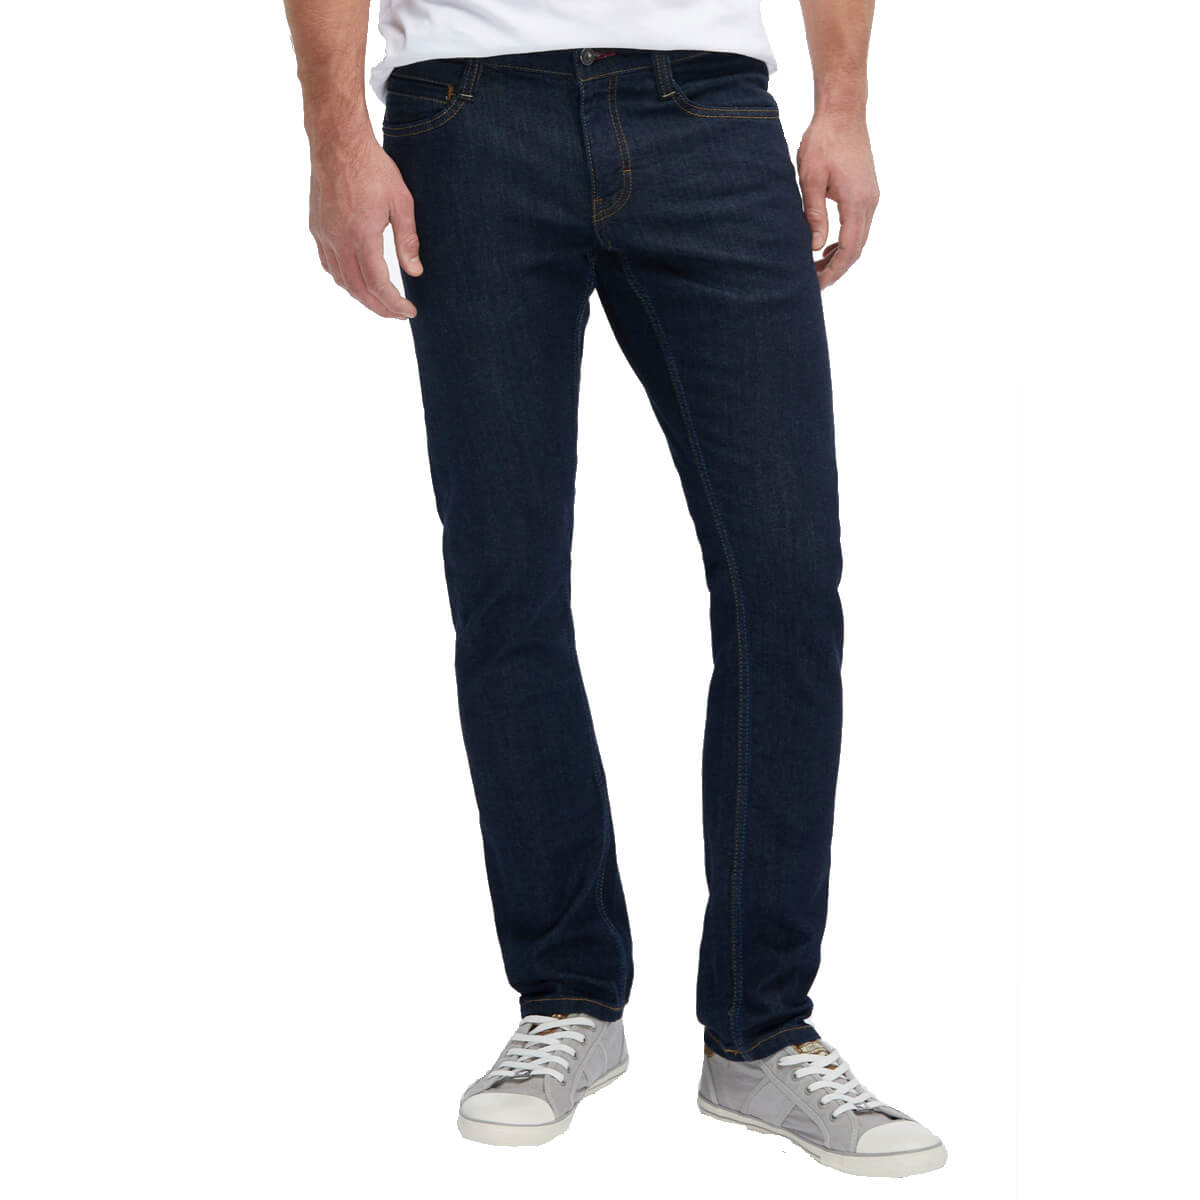 mustang jeans oregon tapered navy 3116 5357 590